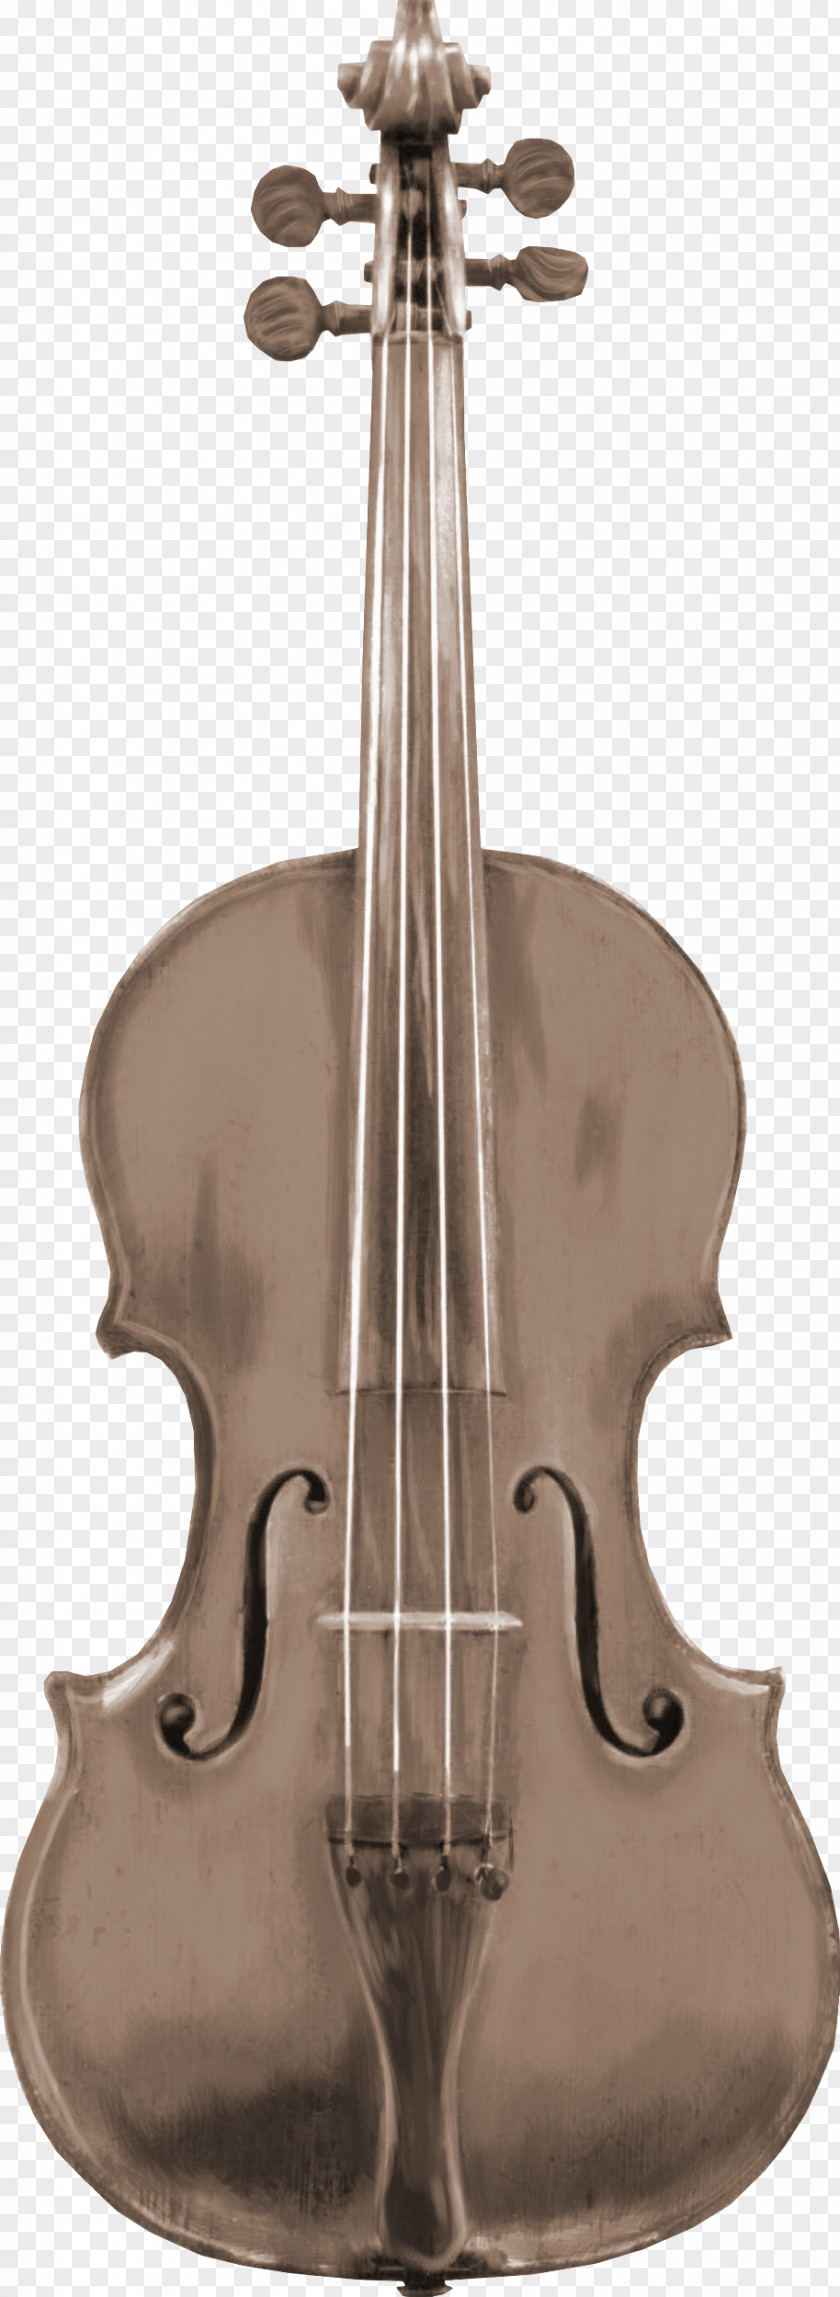 Guitar Cremona Violin Musical Instrument Bow Cello PNG